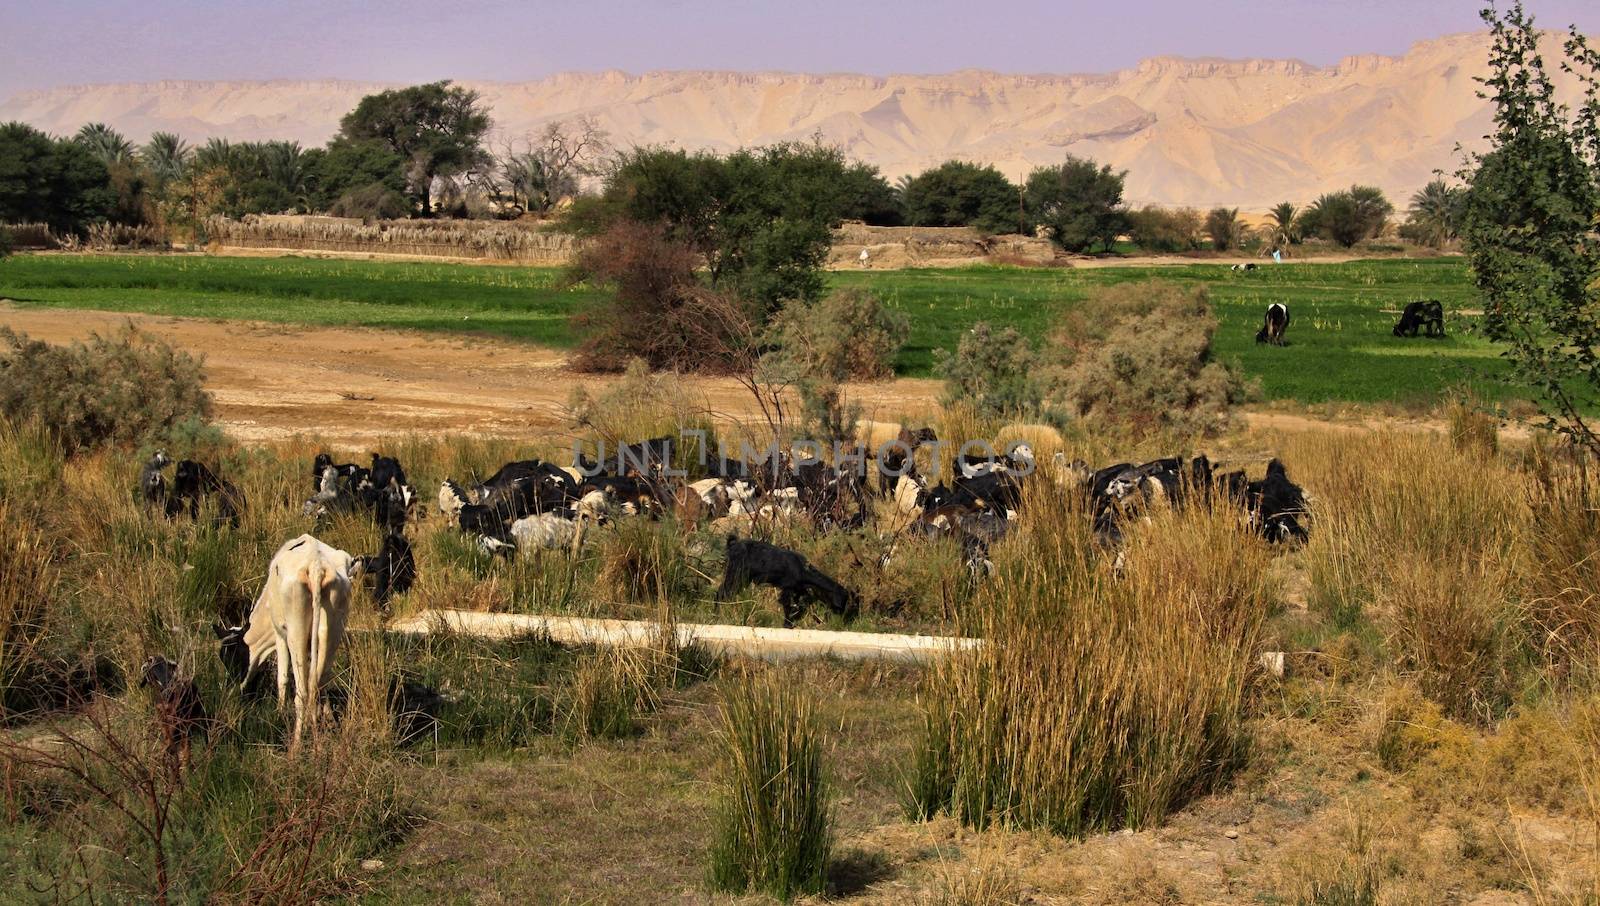 Western Desert Oasis of Kharga, herd of cows, sheeps and goats, Egypt 